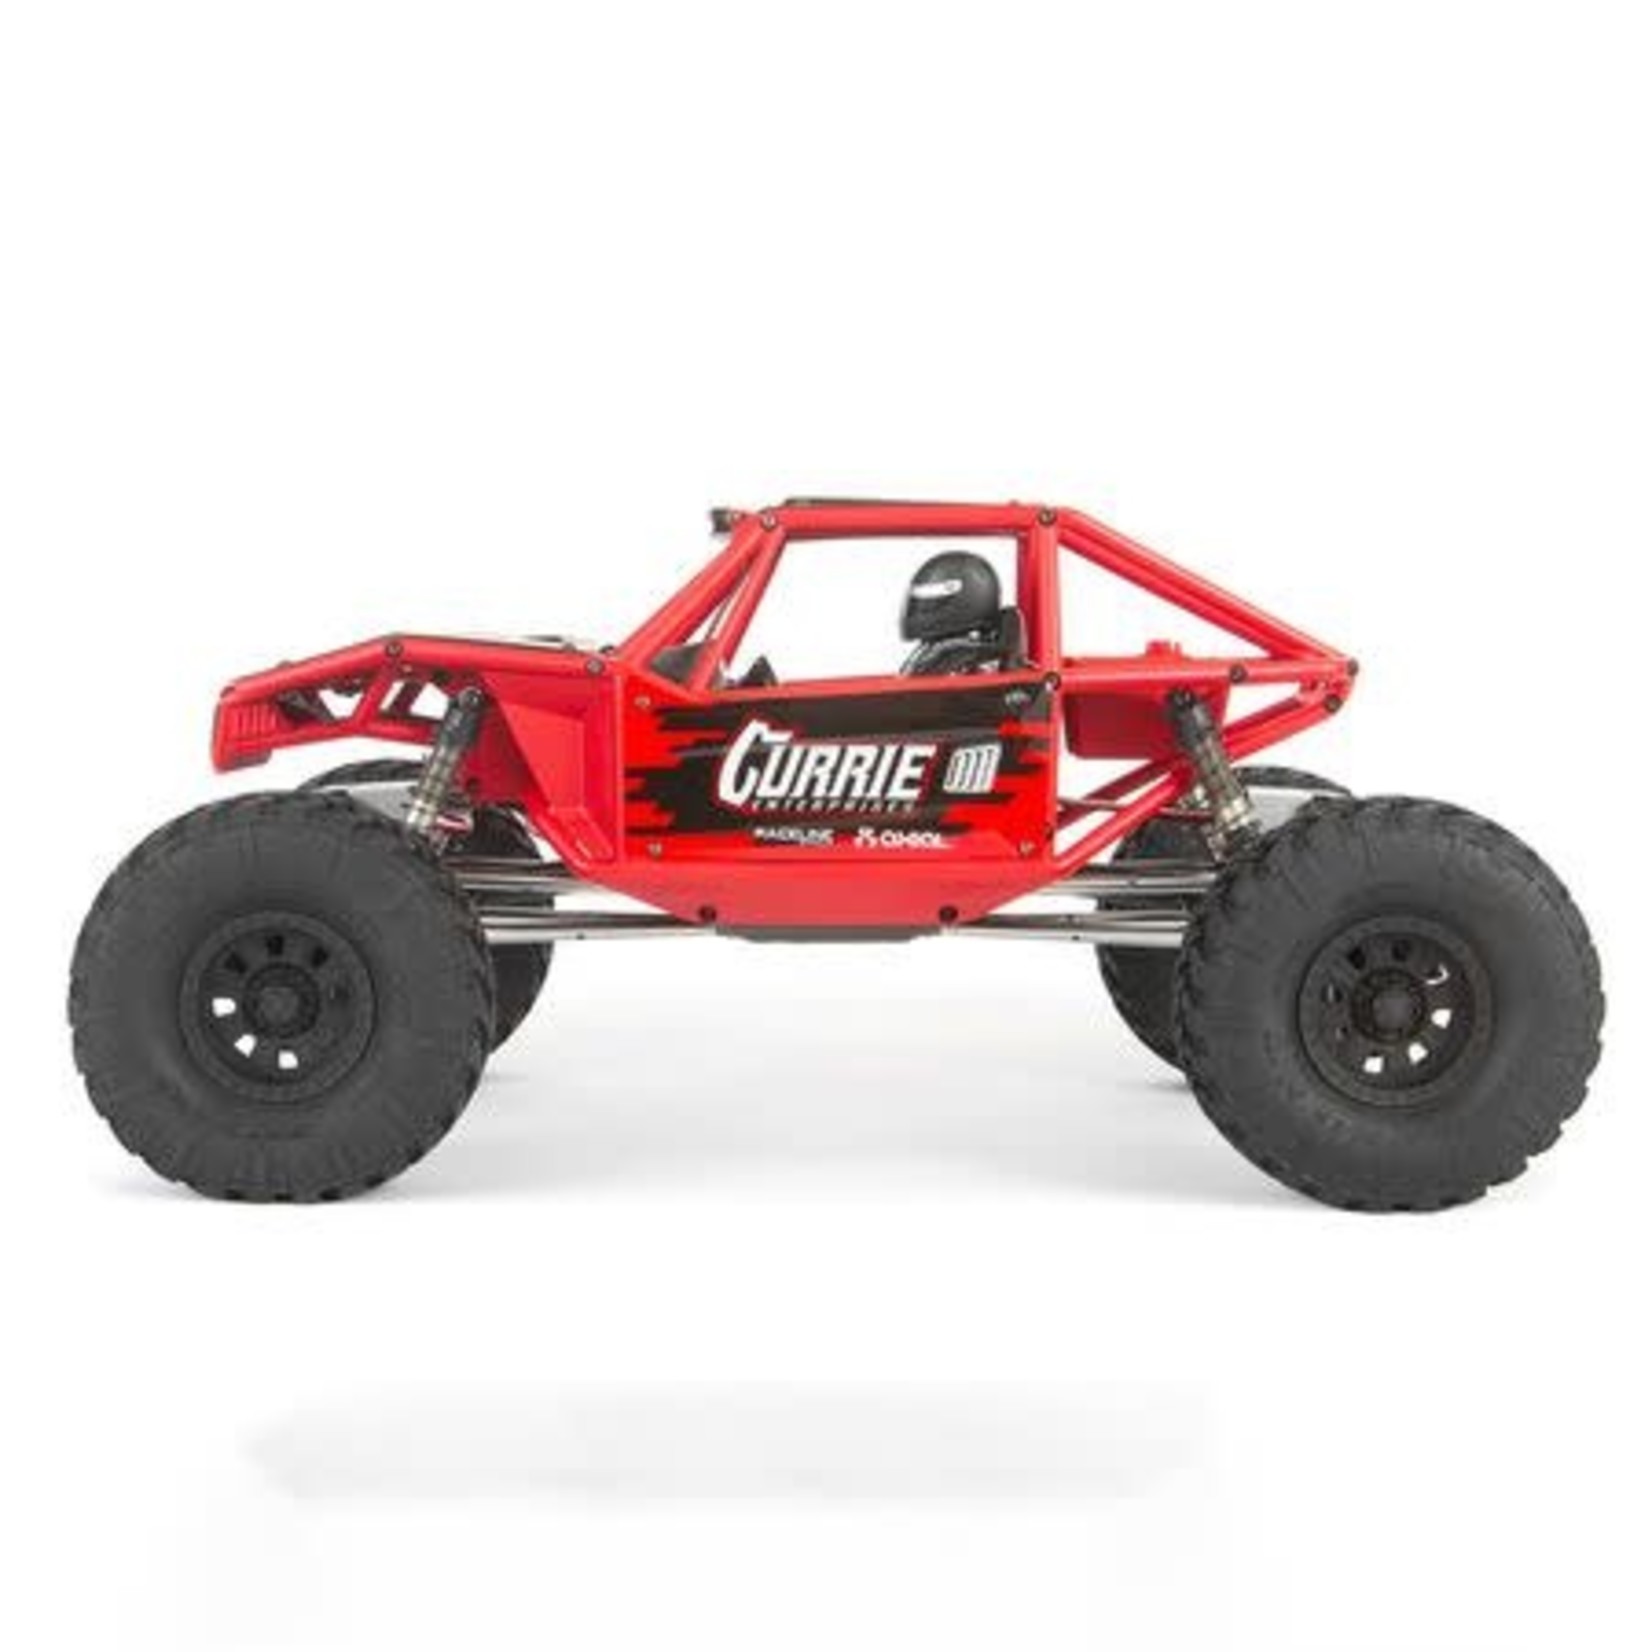 Axial 1/10 Capra 1.9 4WS Currie Unlimited Trail Buggy RTR